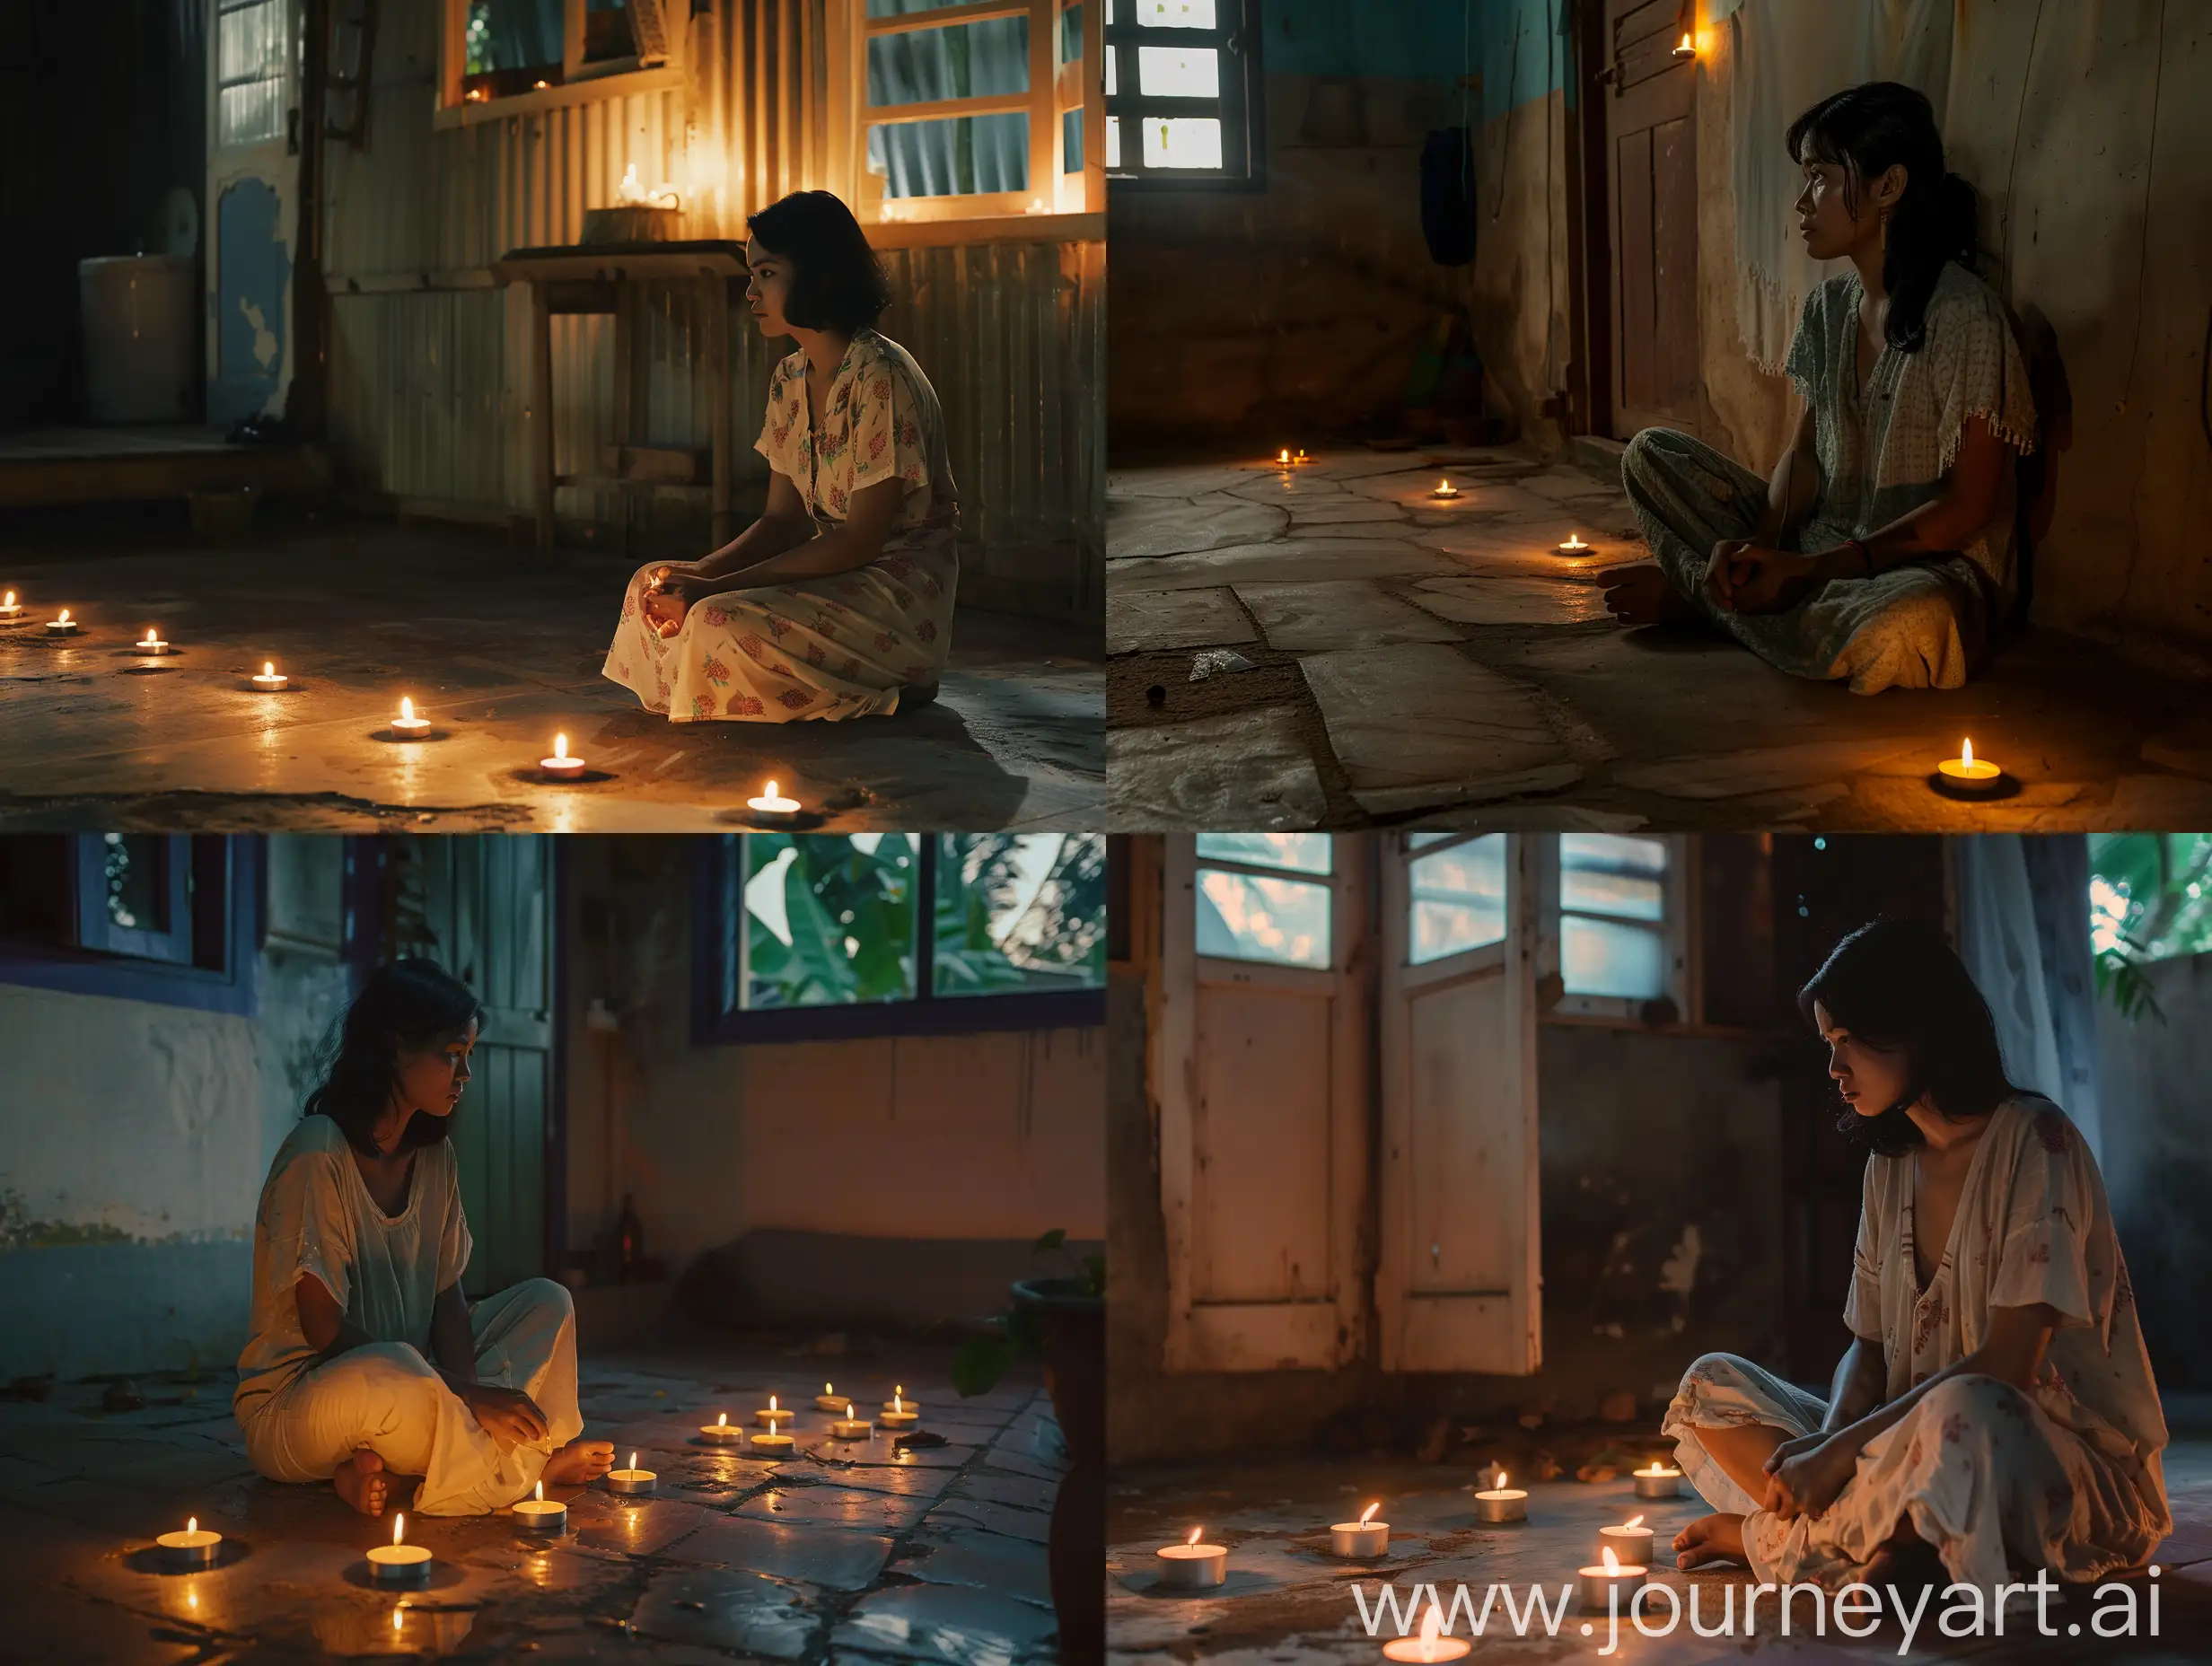 Indonesian-Woman-Creating-Mysterious-Atmosphere-with-Candles-in-Horror-Film-Scene